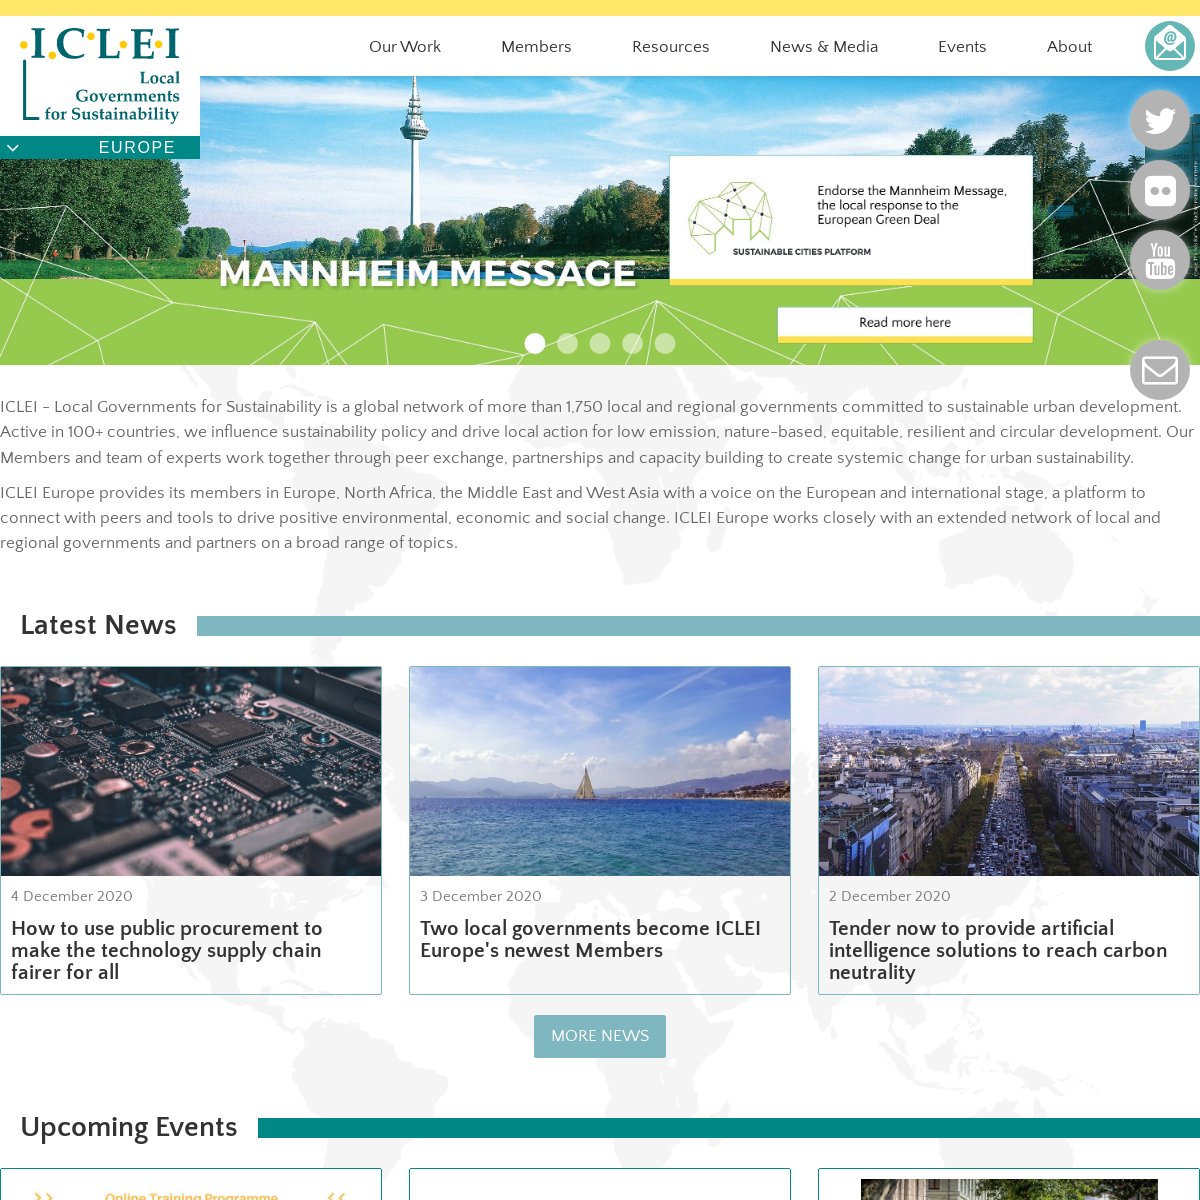 A complete backup of iclei-europe.org